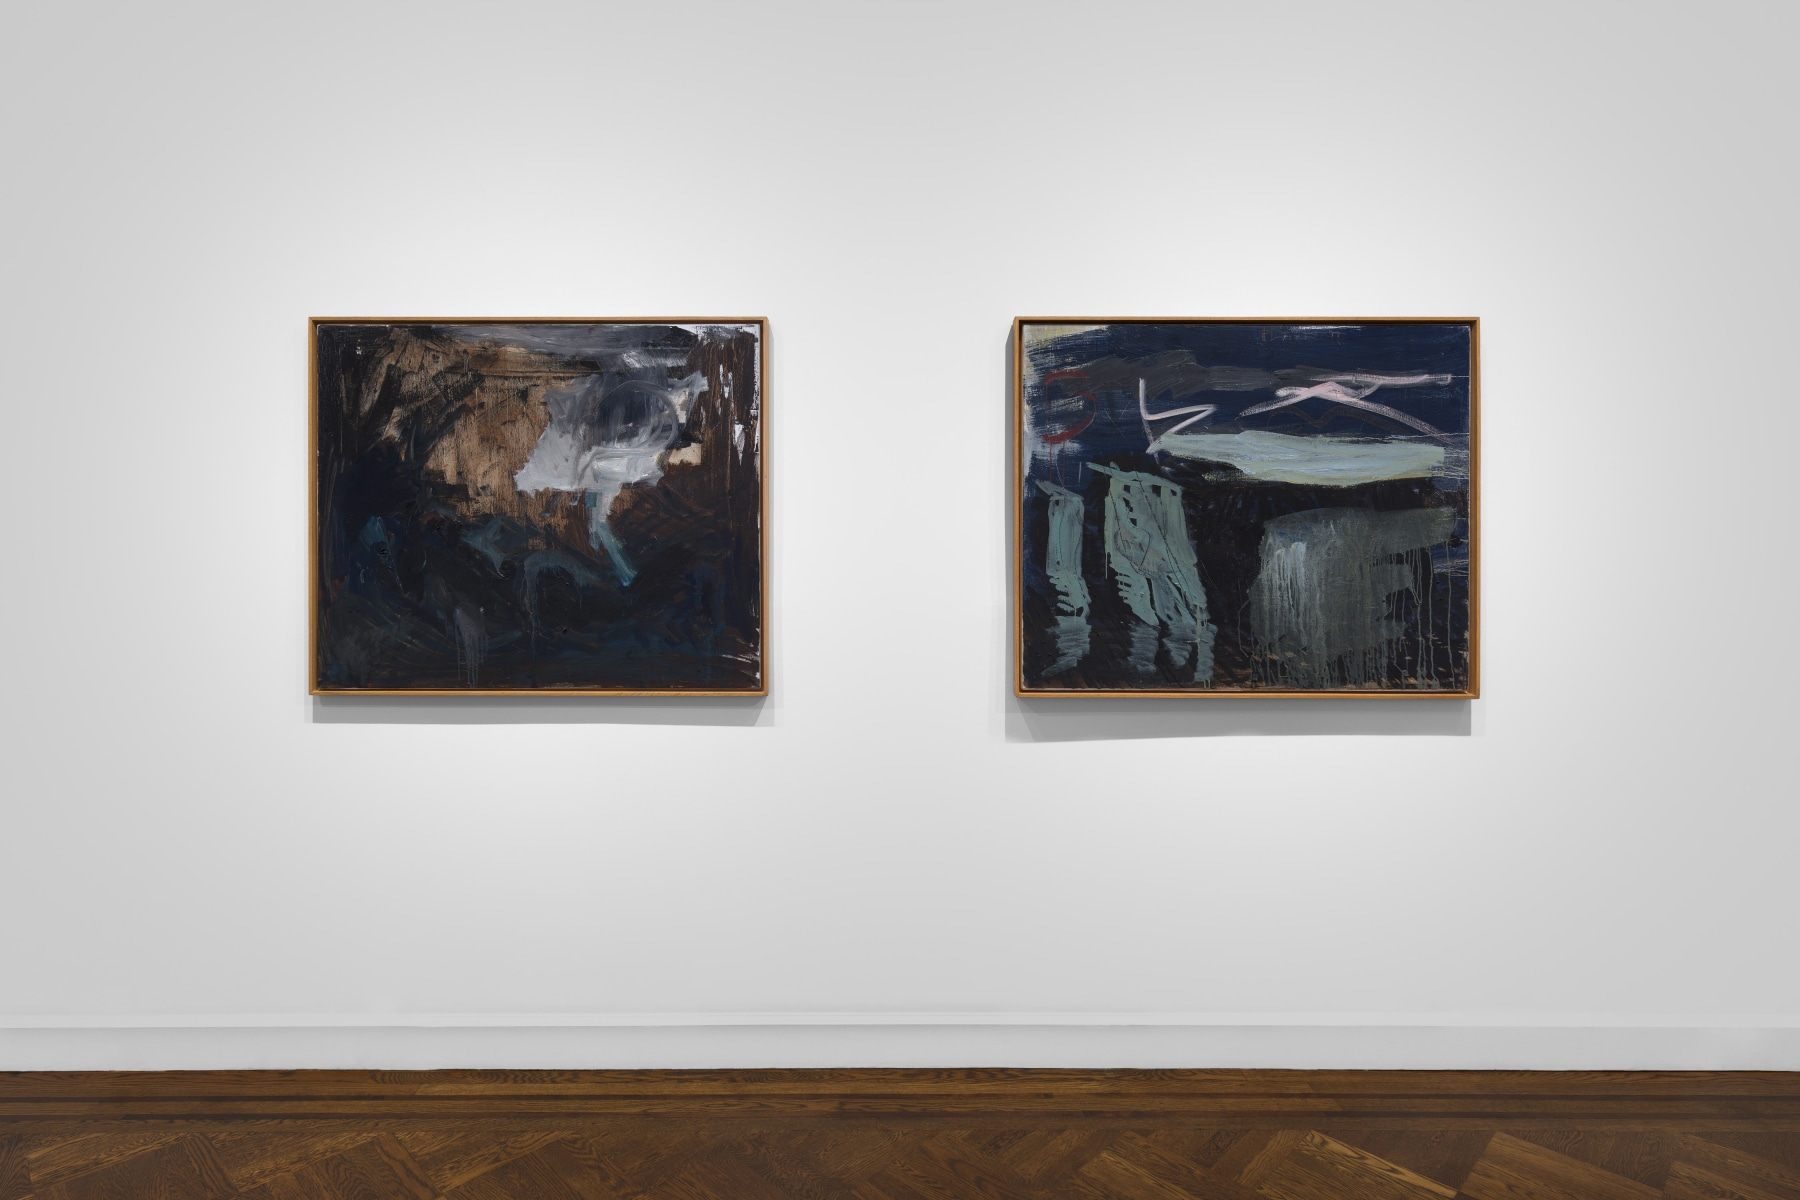 PER KIRKEBY, Paintings and Bronzes from the 1980s, New York, 2018, Installation Image 21